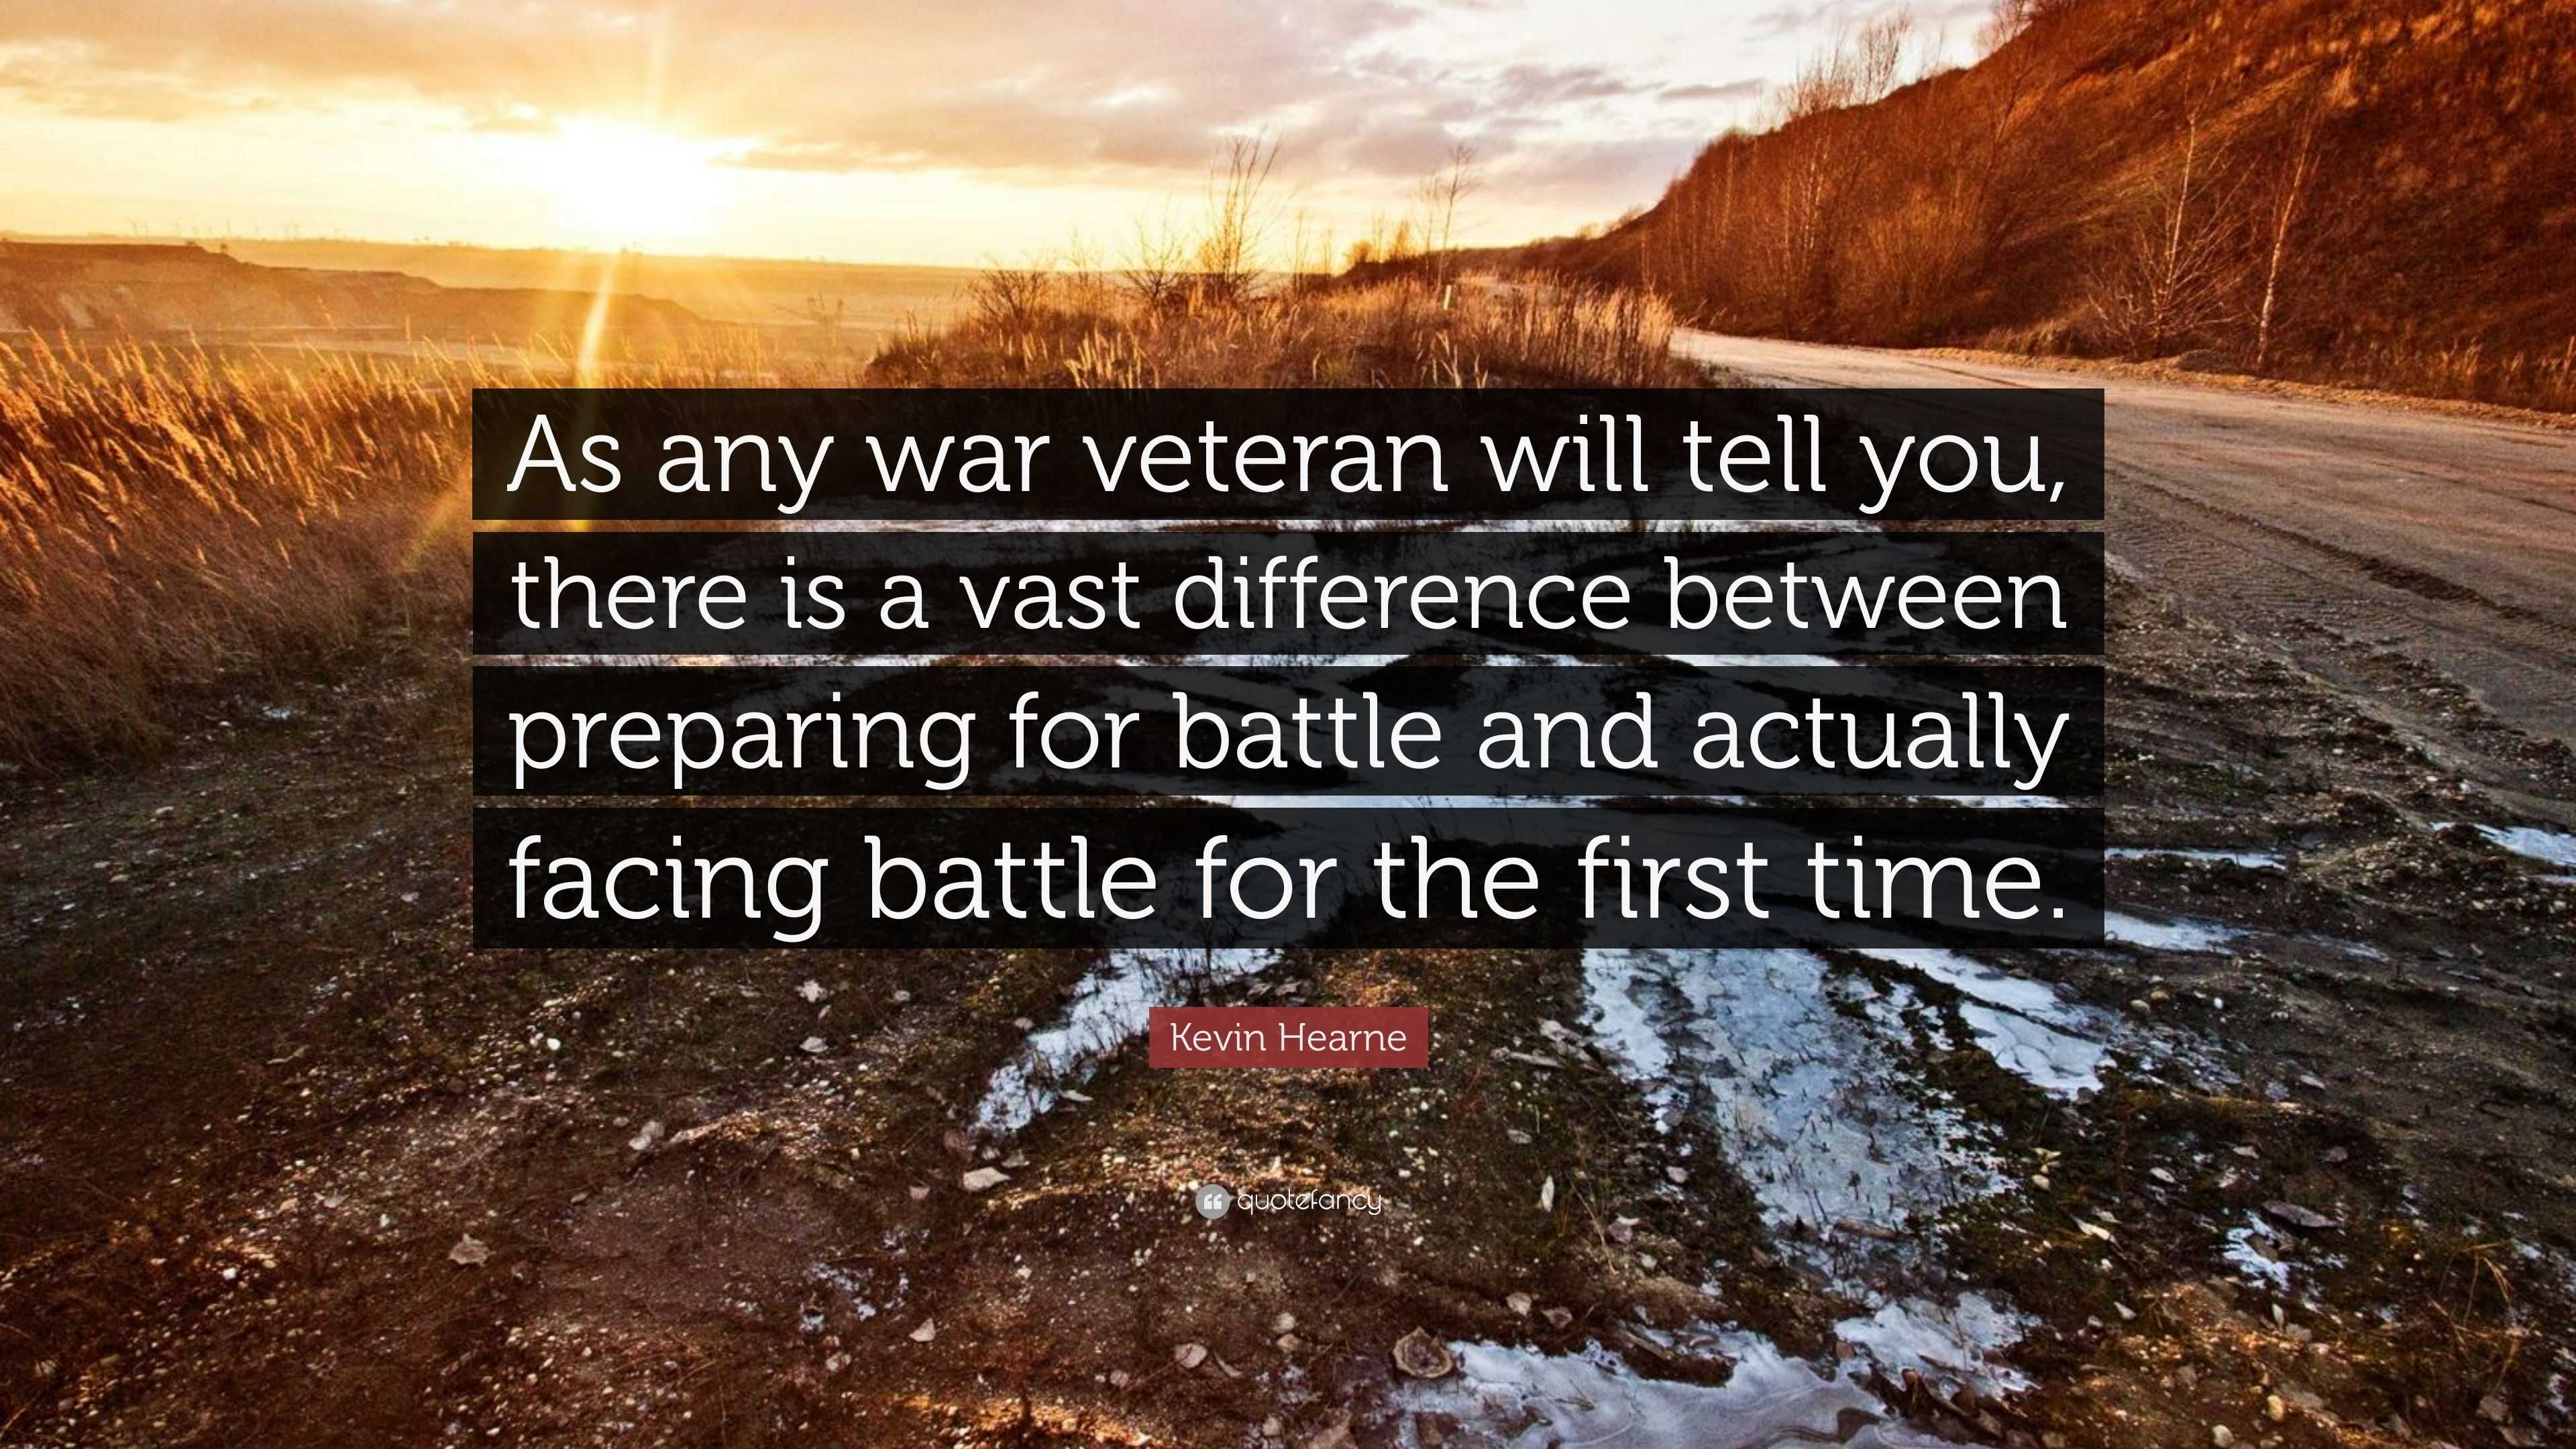 Difference between Battle and War